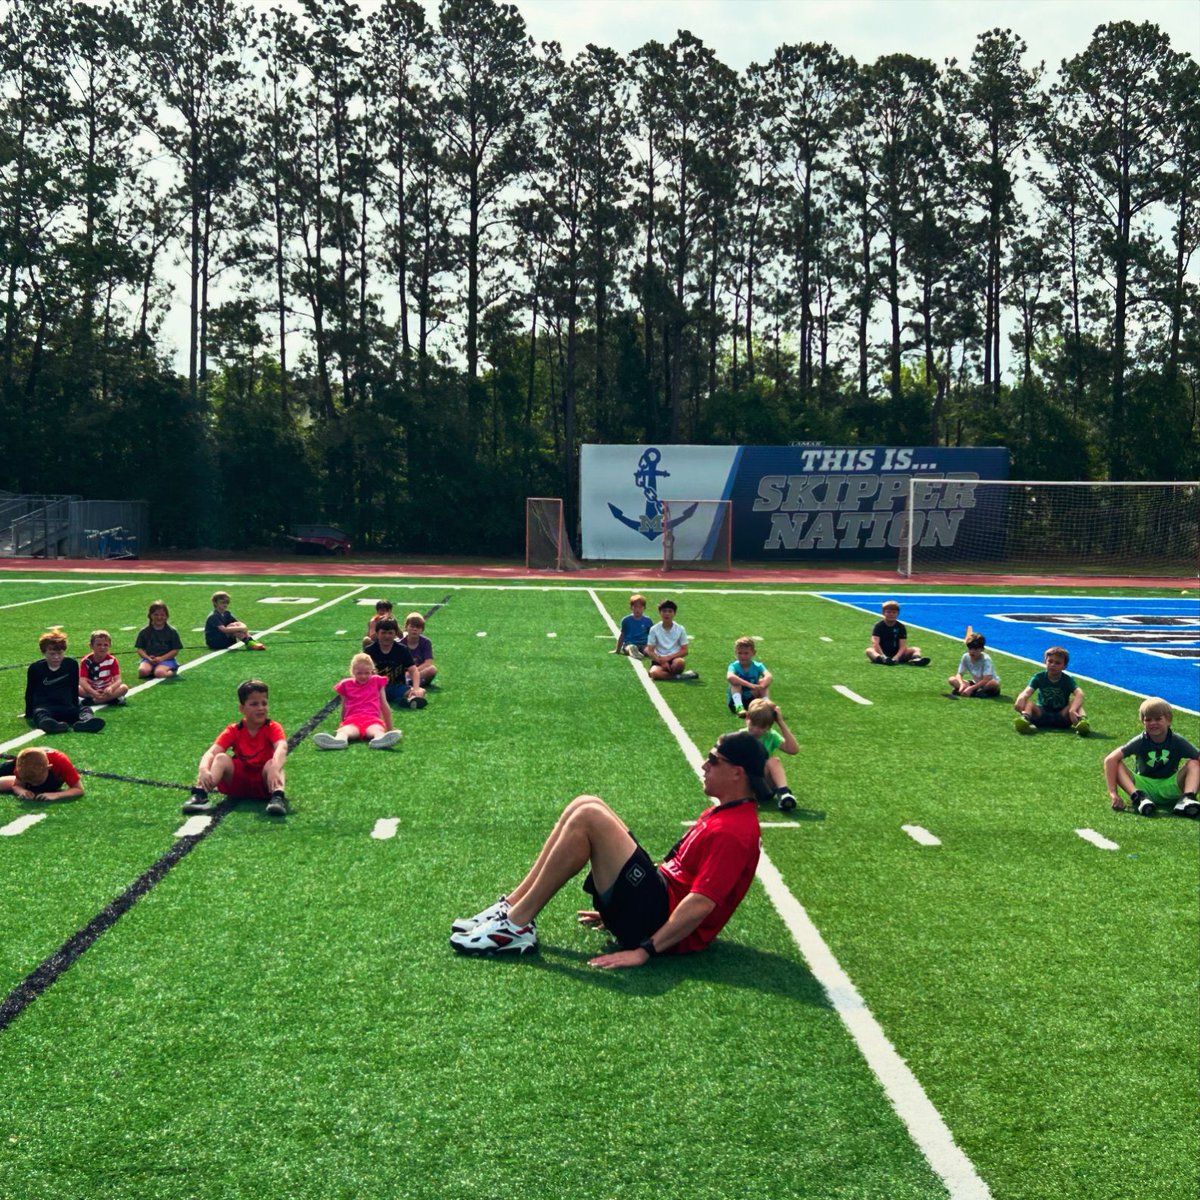 ⚓️Lil Skippers⚓️Our #speedandagility camp is underway with our 7-11yr olds 🏃🏃‍♀️🏃‍♂️💨
#firstsession #traind1fferent #d1mandeville #d1training #speedwork #camp #strengthandconditioning #coach